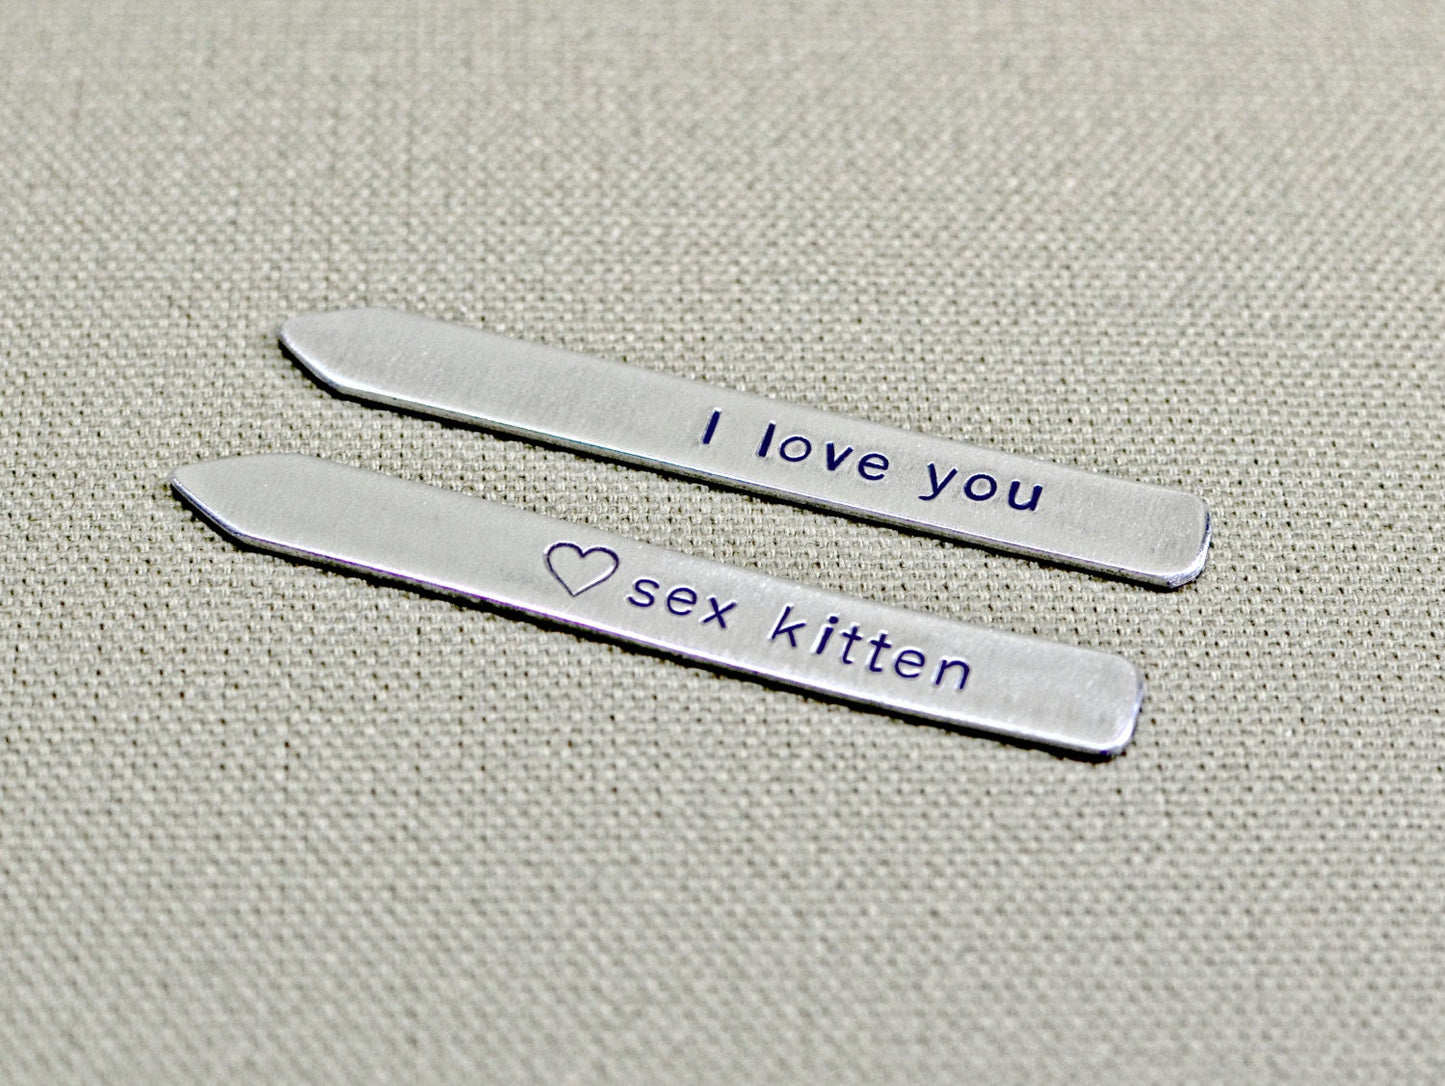 Aluminum collar stays stamped with sex kitten